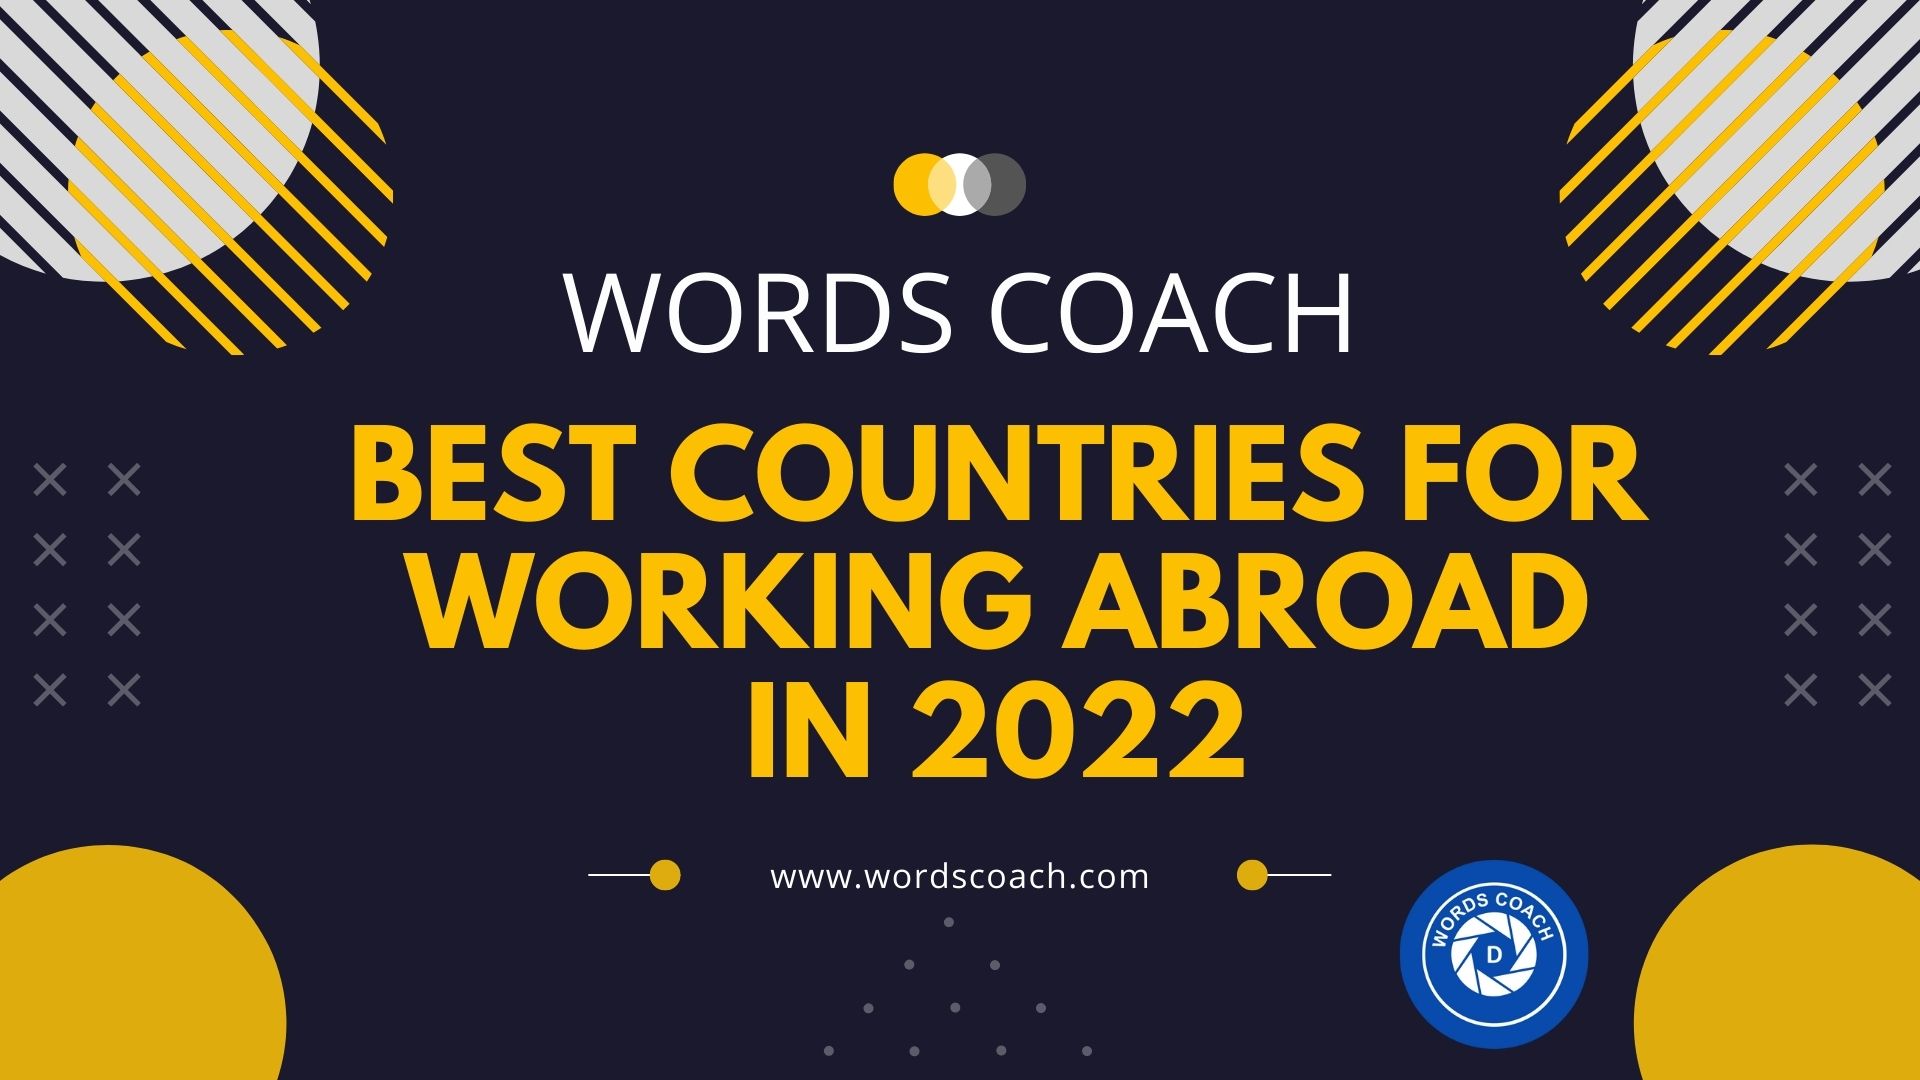 Best countries for working abroad in 2022 - wordscoach.com